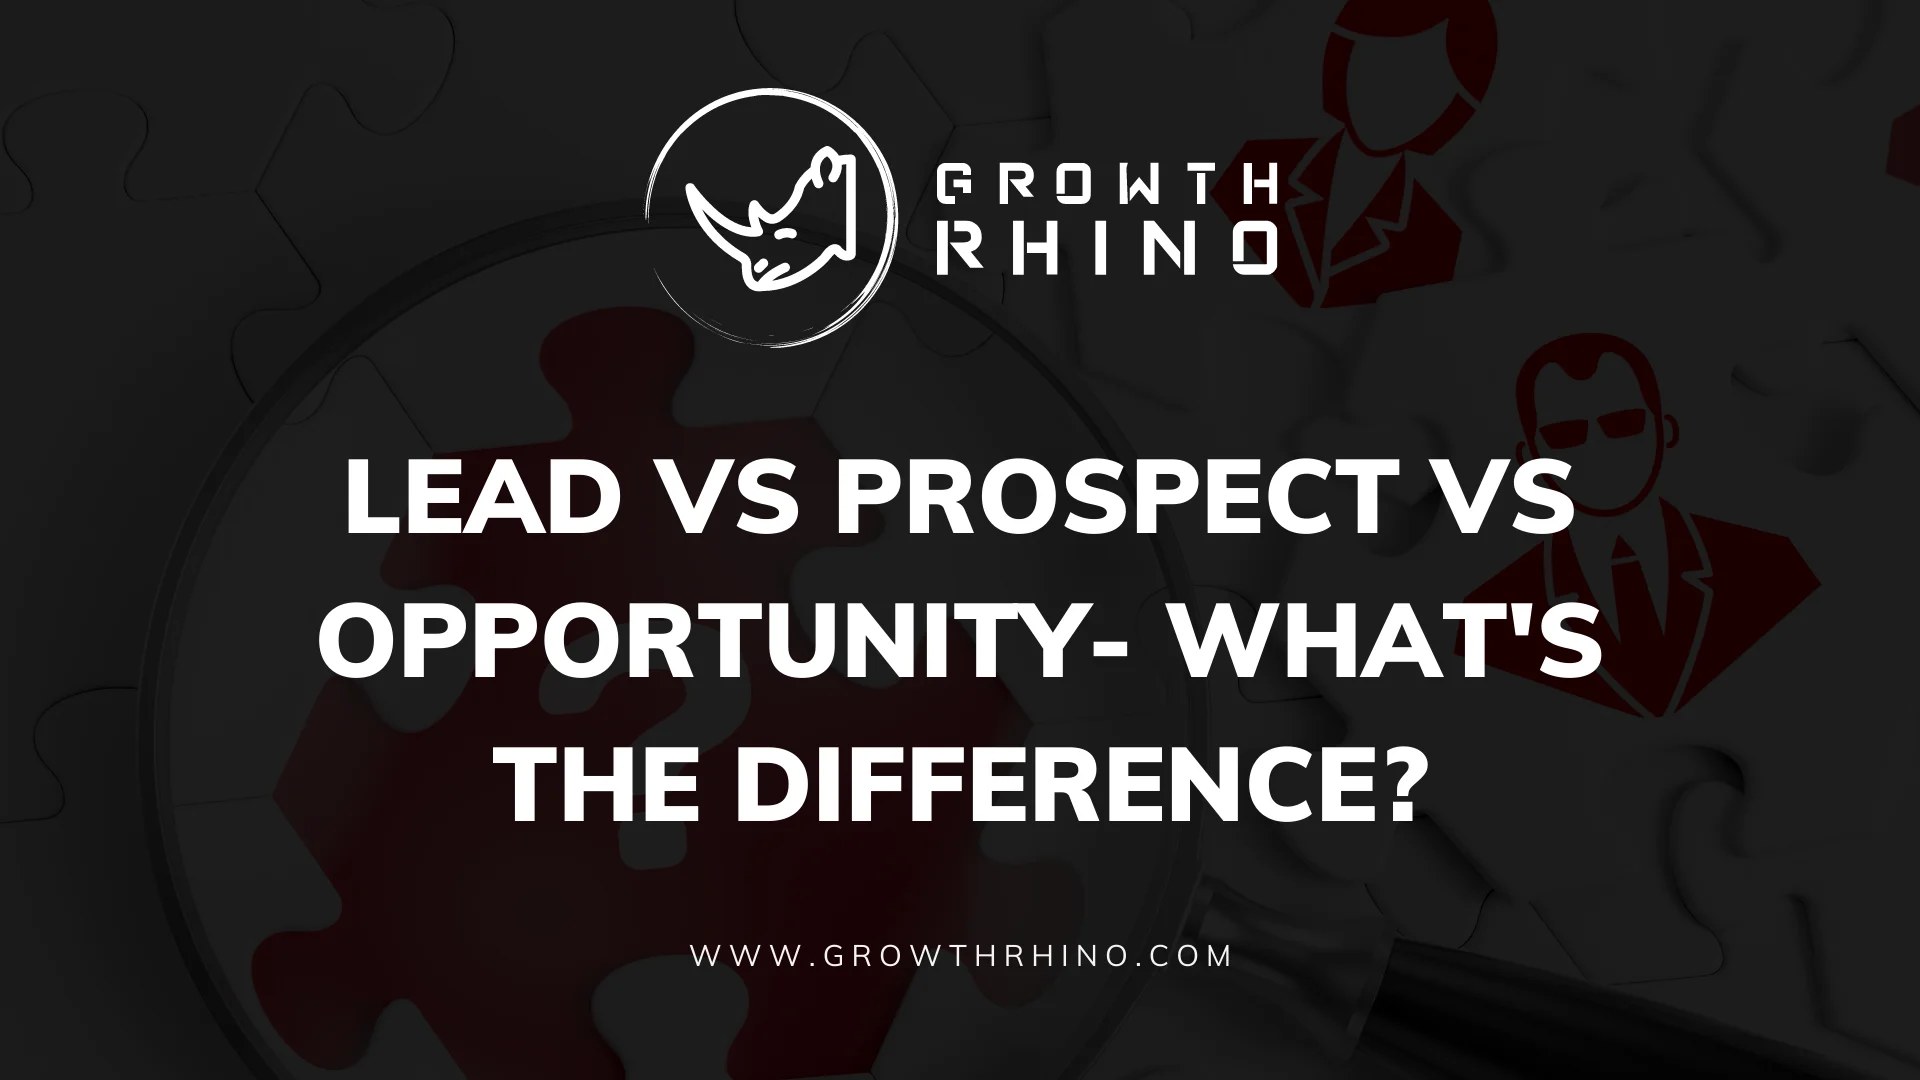 Lead vs Prospect vs Opportunity – What’s the Difference?